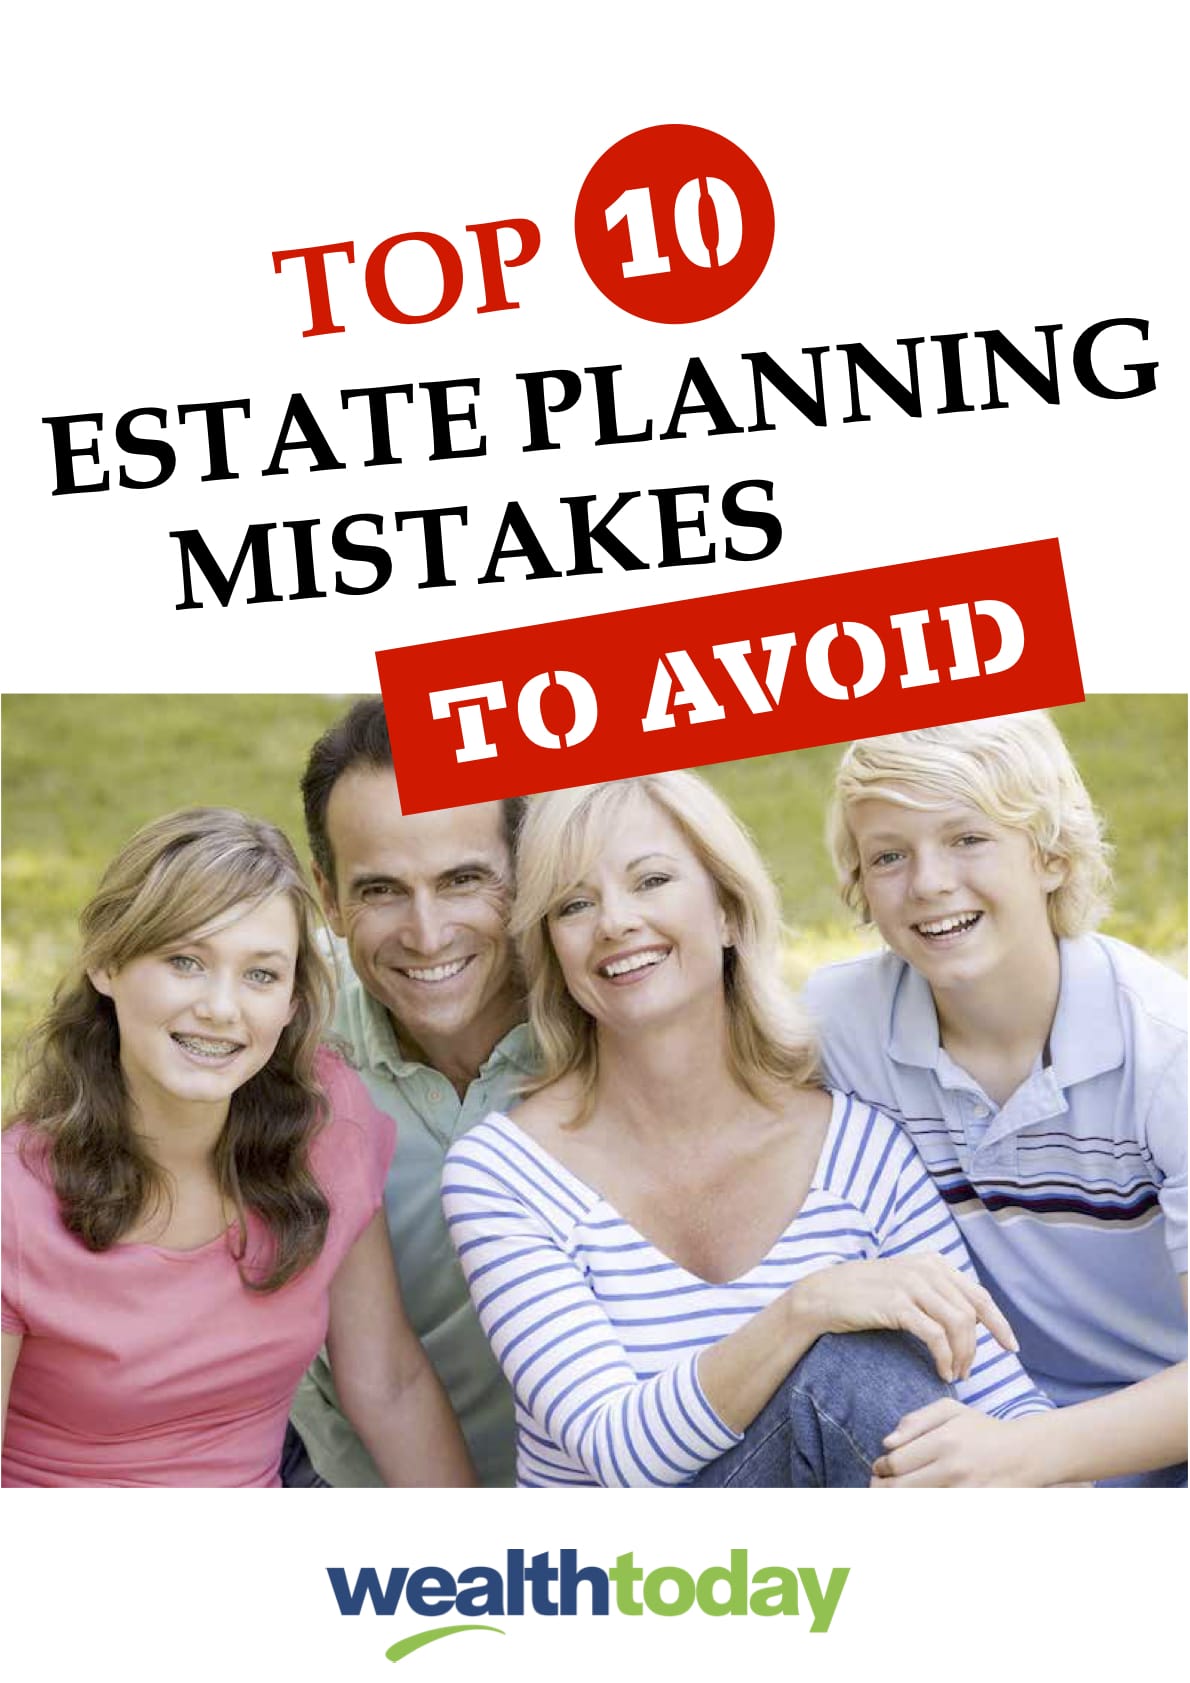 Top-10-Estate-Planning-Mistakes-to-Avoid-WT